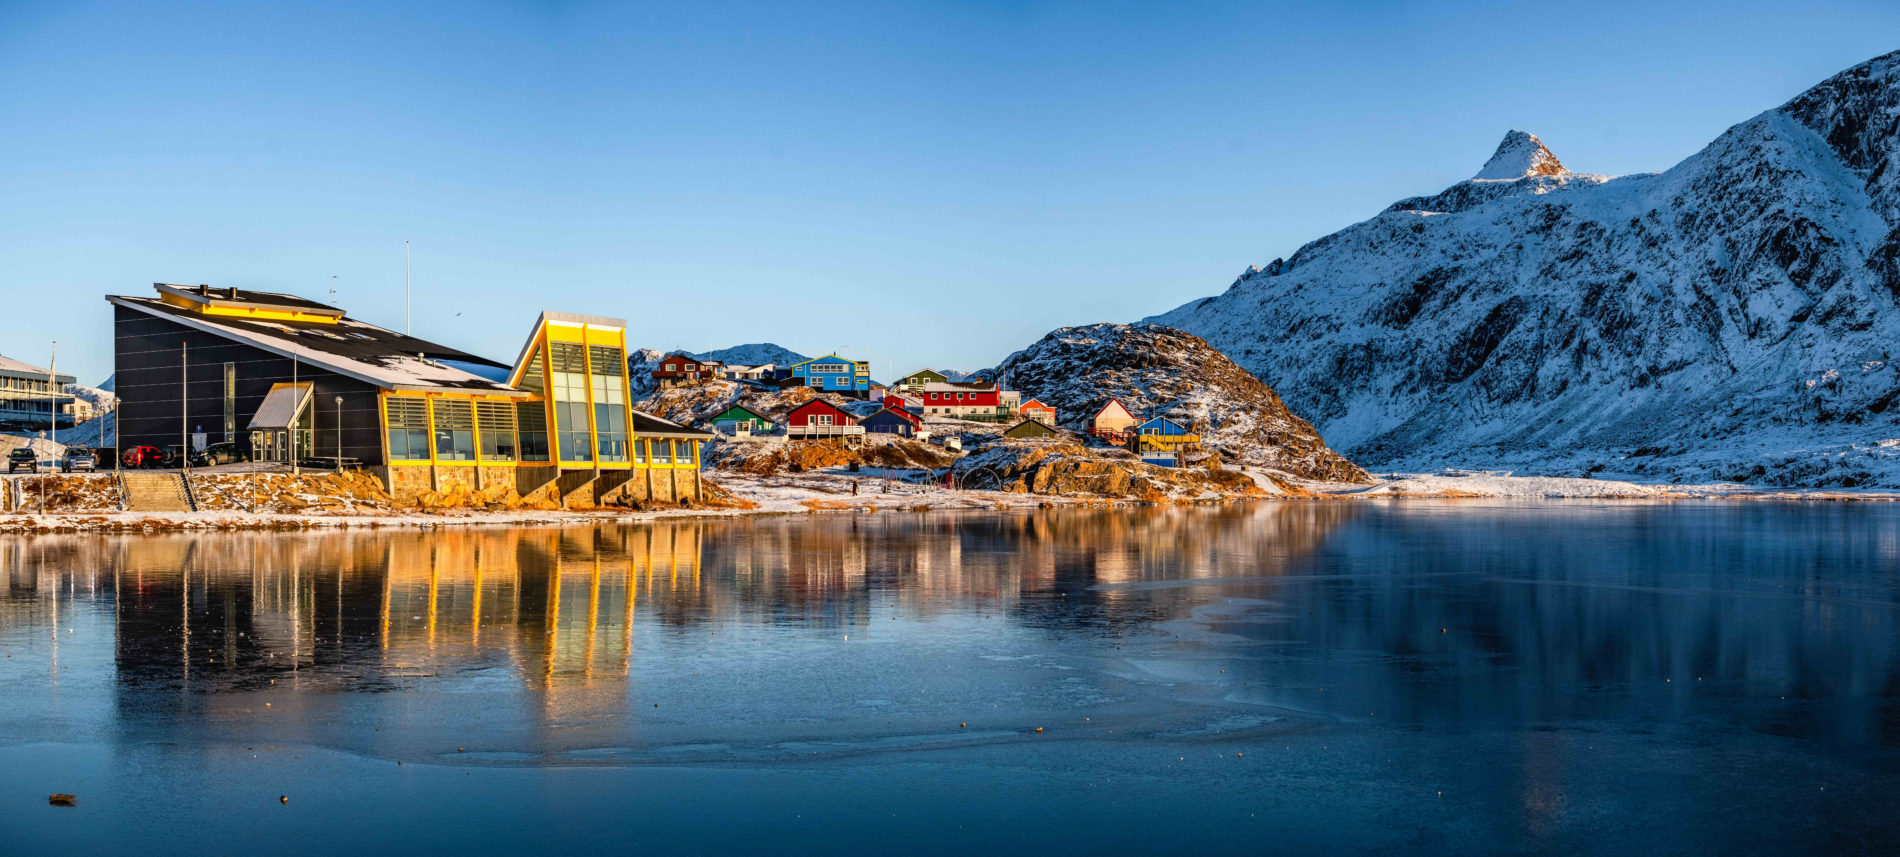 Taseralik Culture Centre and lake in central Sisimiut